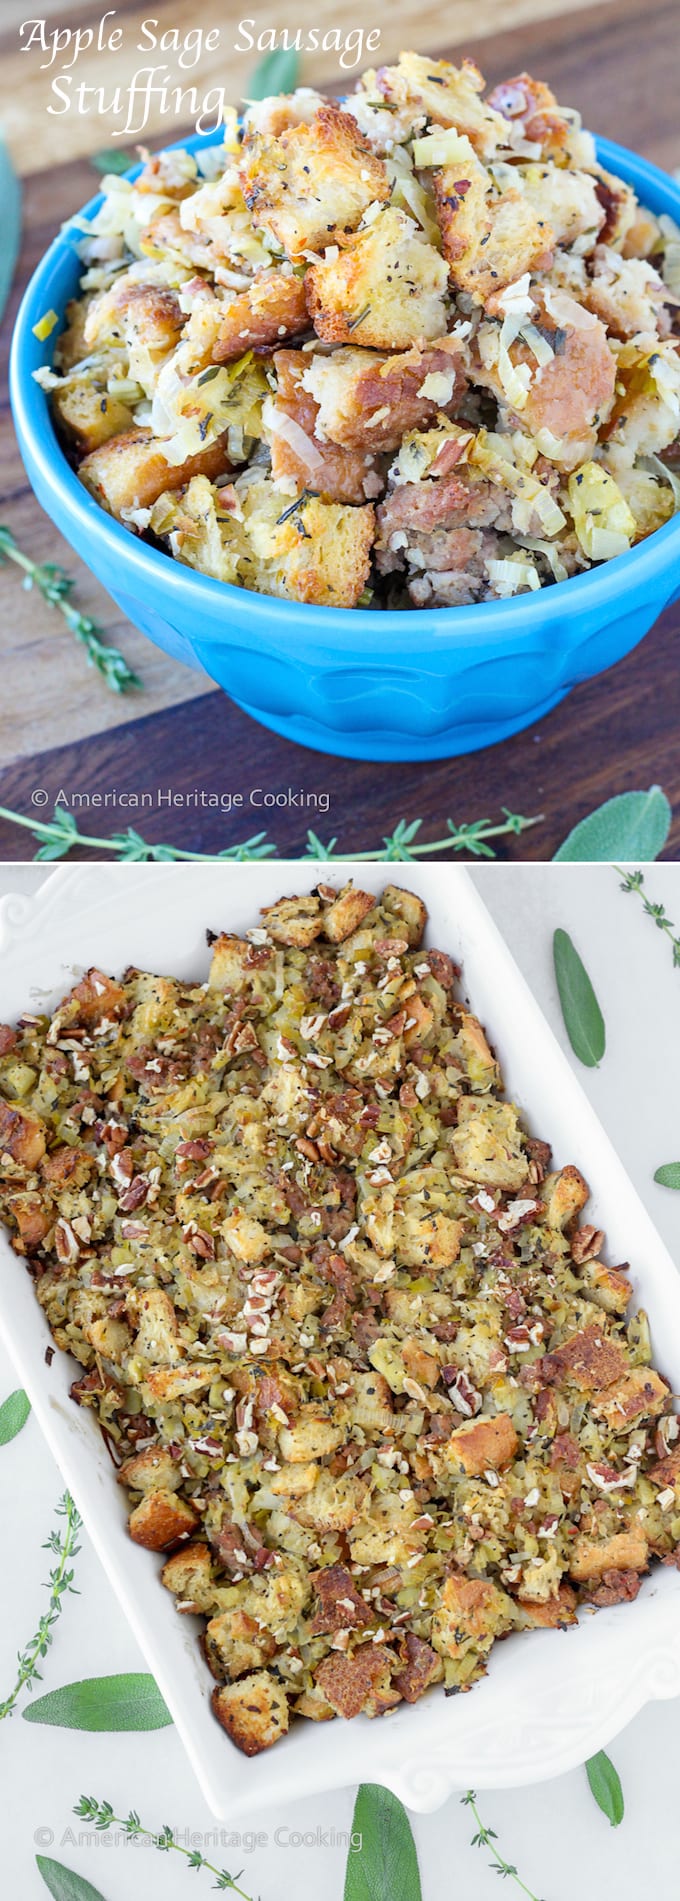 This easy Apple Sage Sausage Stuffing recipe will be a sure hit! The leeks, fresh herbs, apples, and spicy Italian sausage make it incredibly flavorful! 